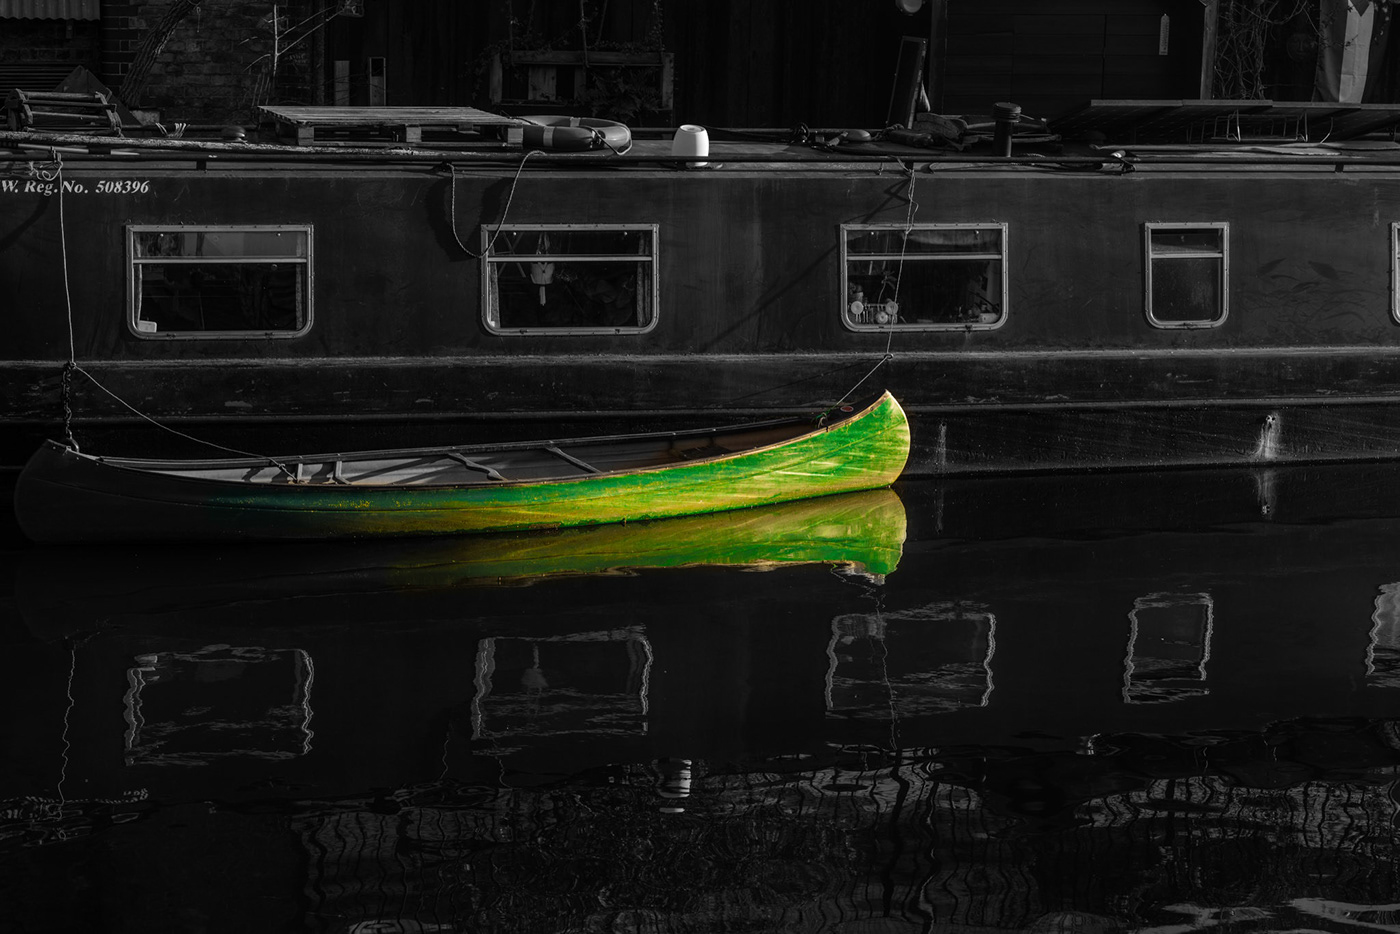 London Photography  photographer Boats narrowboats canals travel photography Transport canal boats Shane Aurousseau